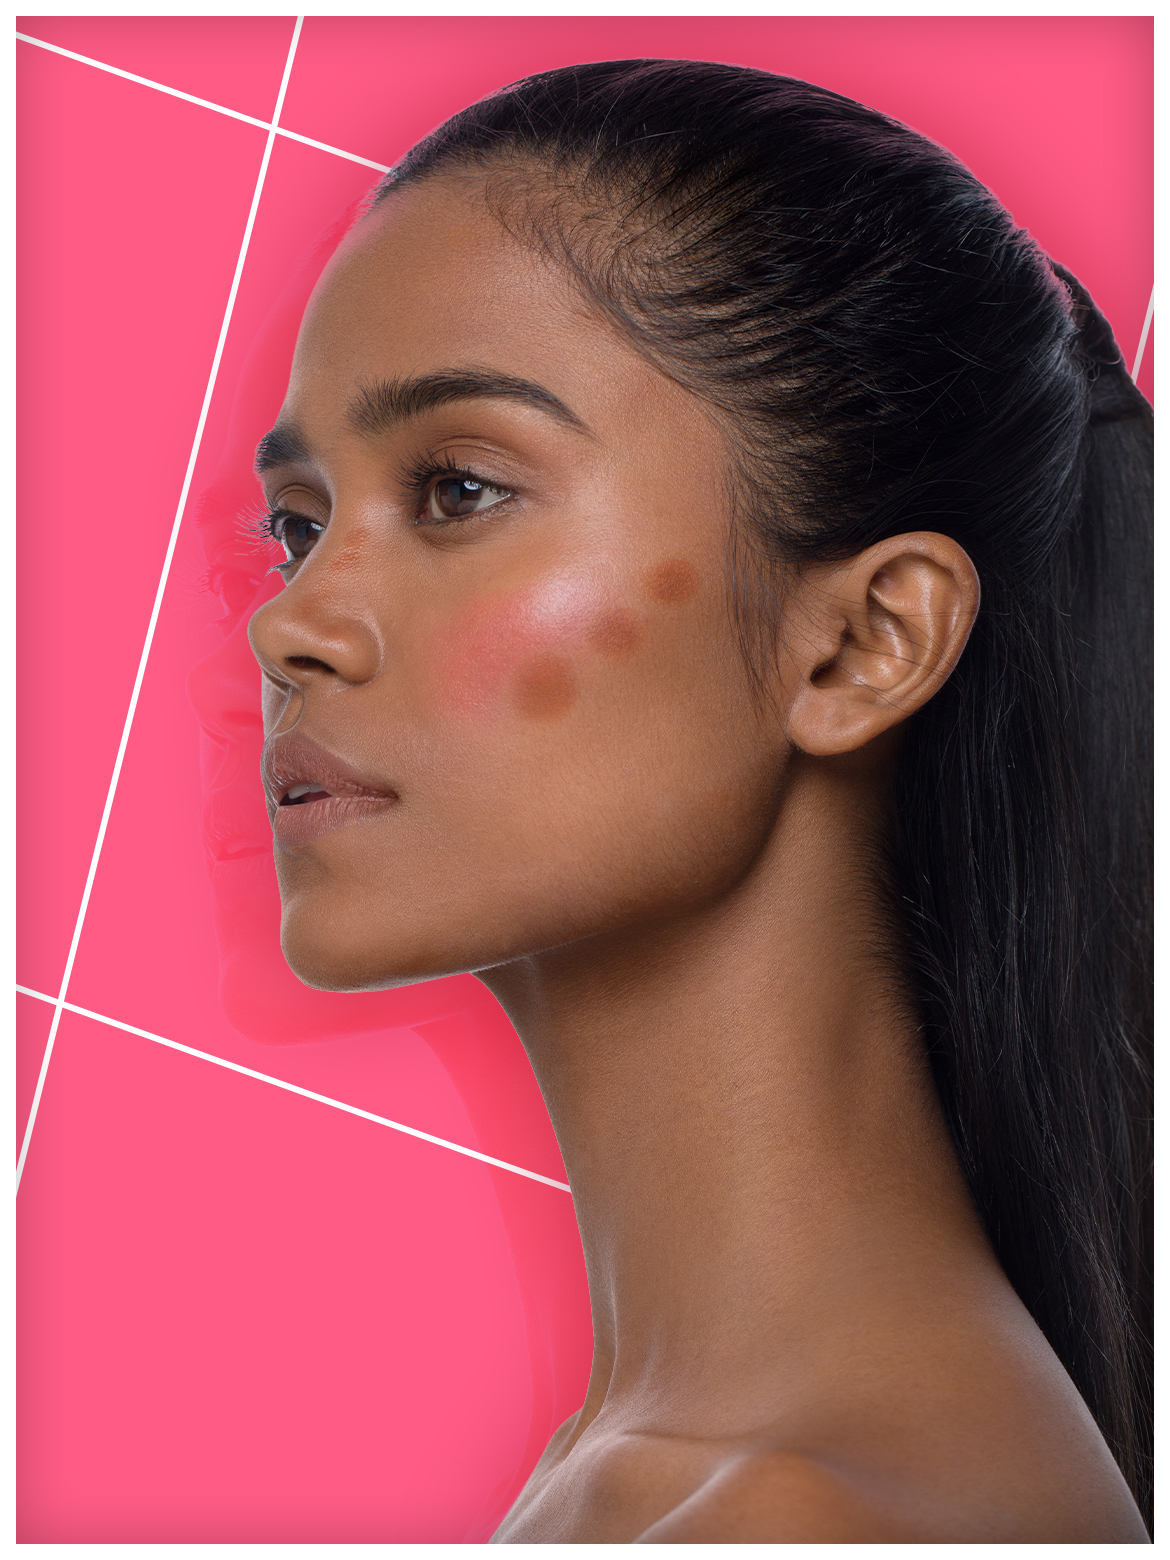 How To Contour - A Step by Step Guide to Contouring Like a Pro